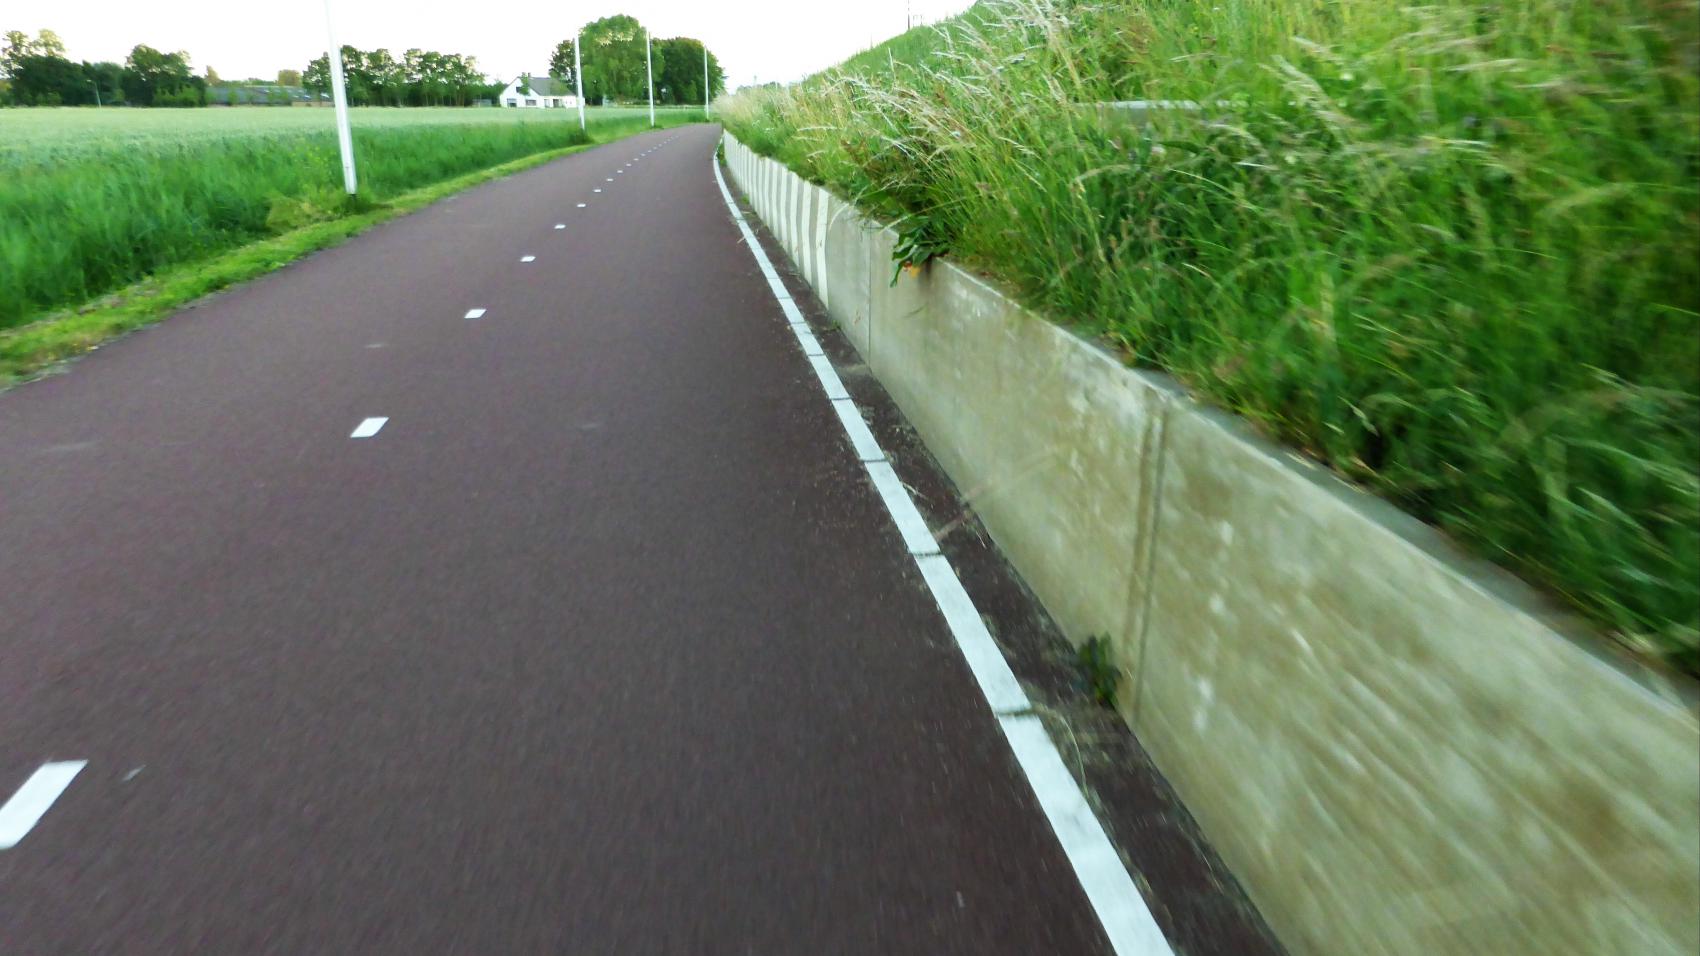 Rare median markings (30 cm line per 3 m) and one-side edge marking to denote the buffer zone and improve the visibility of a low wall. RijnWaalpad cycle highway in Gelderland.  